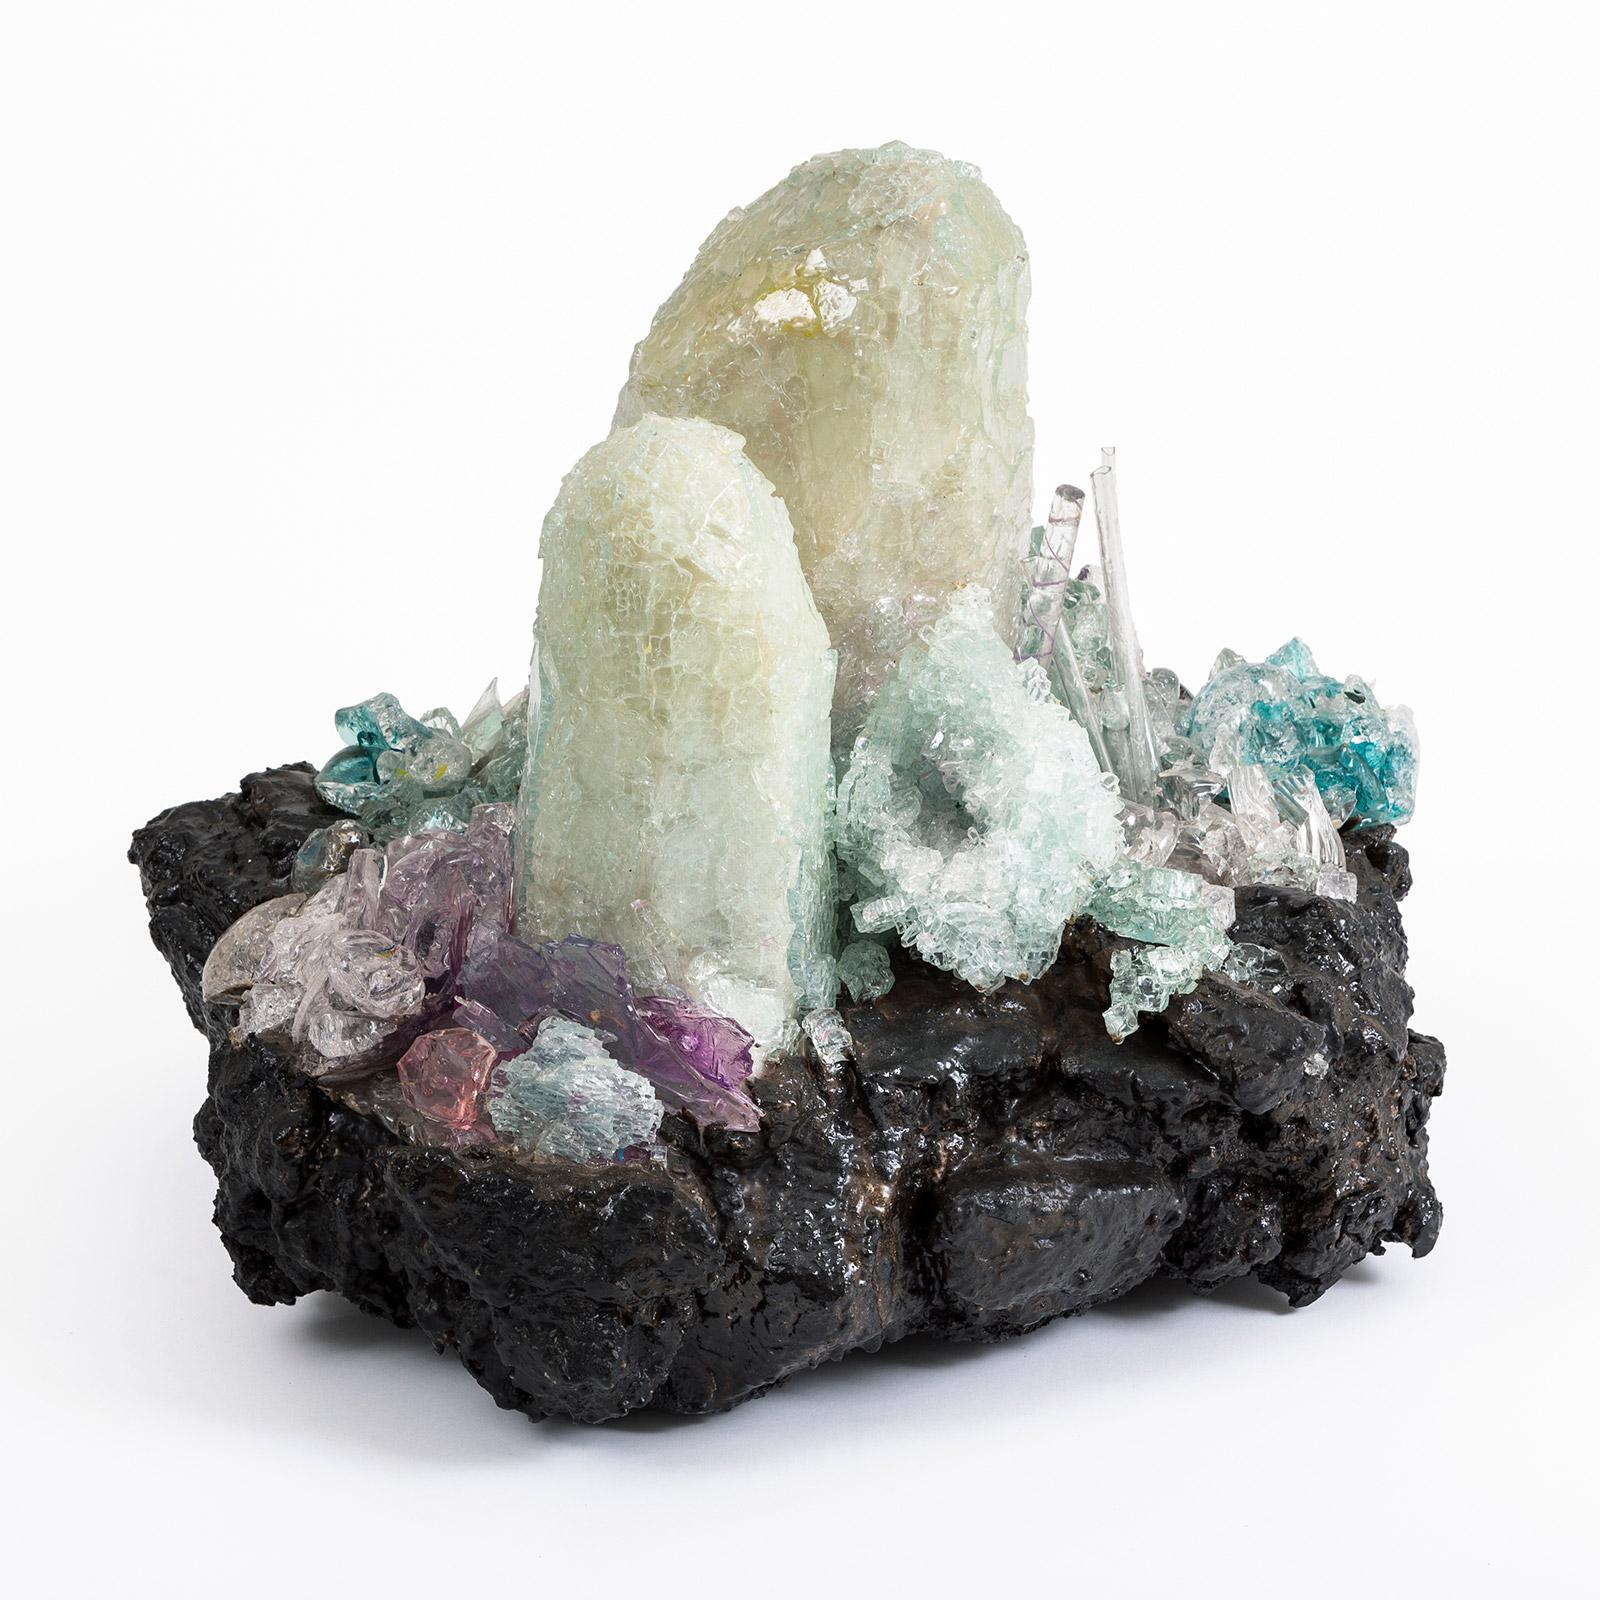 The candy floss colors of minerals sometimes make us forget the violence and force that Mother Nature uses to create them. We have used resins and glass in a very free, artistic way to represent this explosion of beauty. They come, as in nature, in